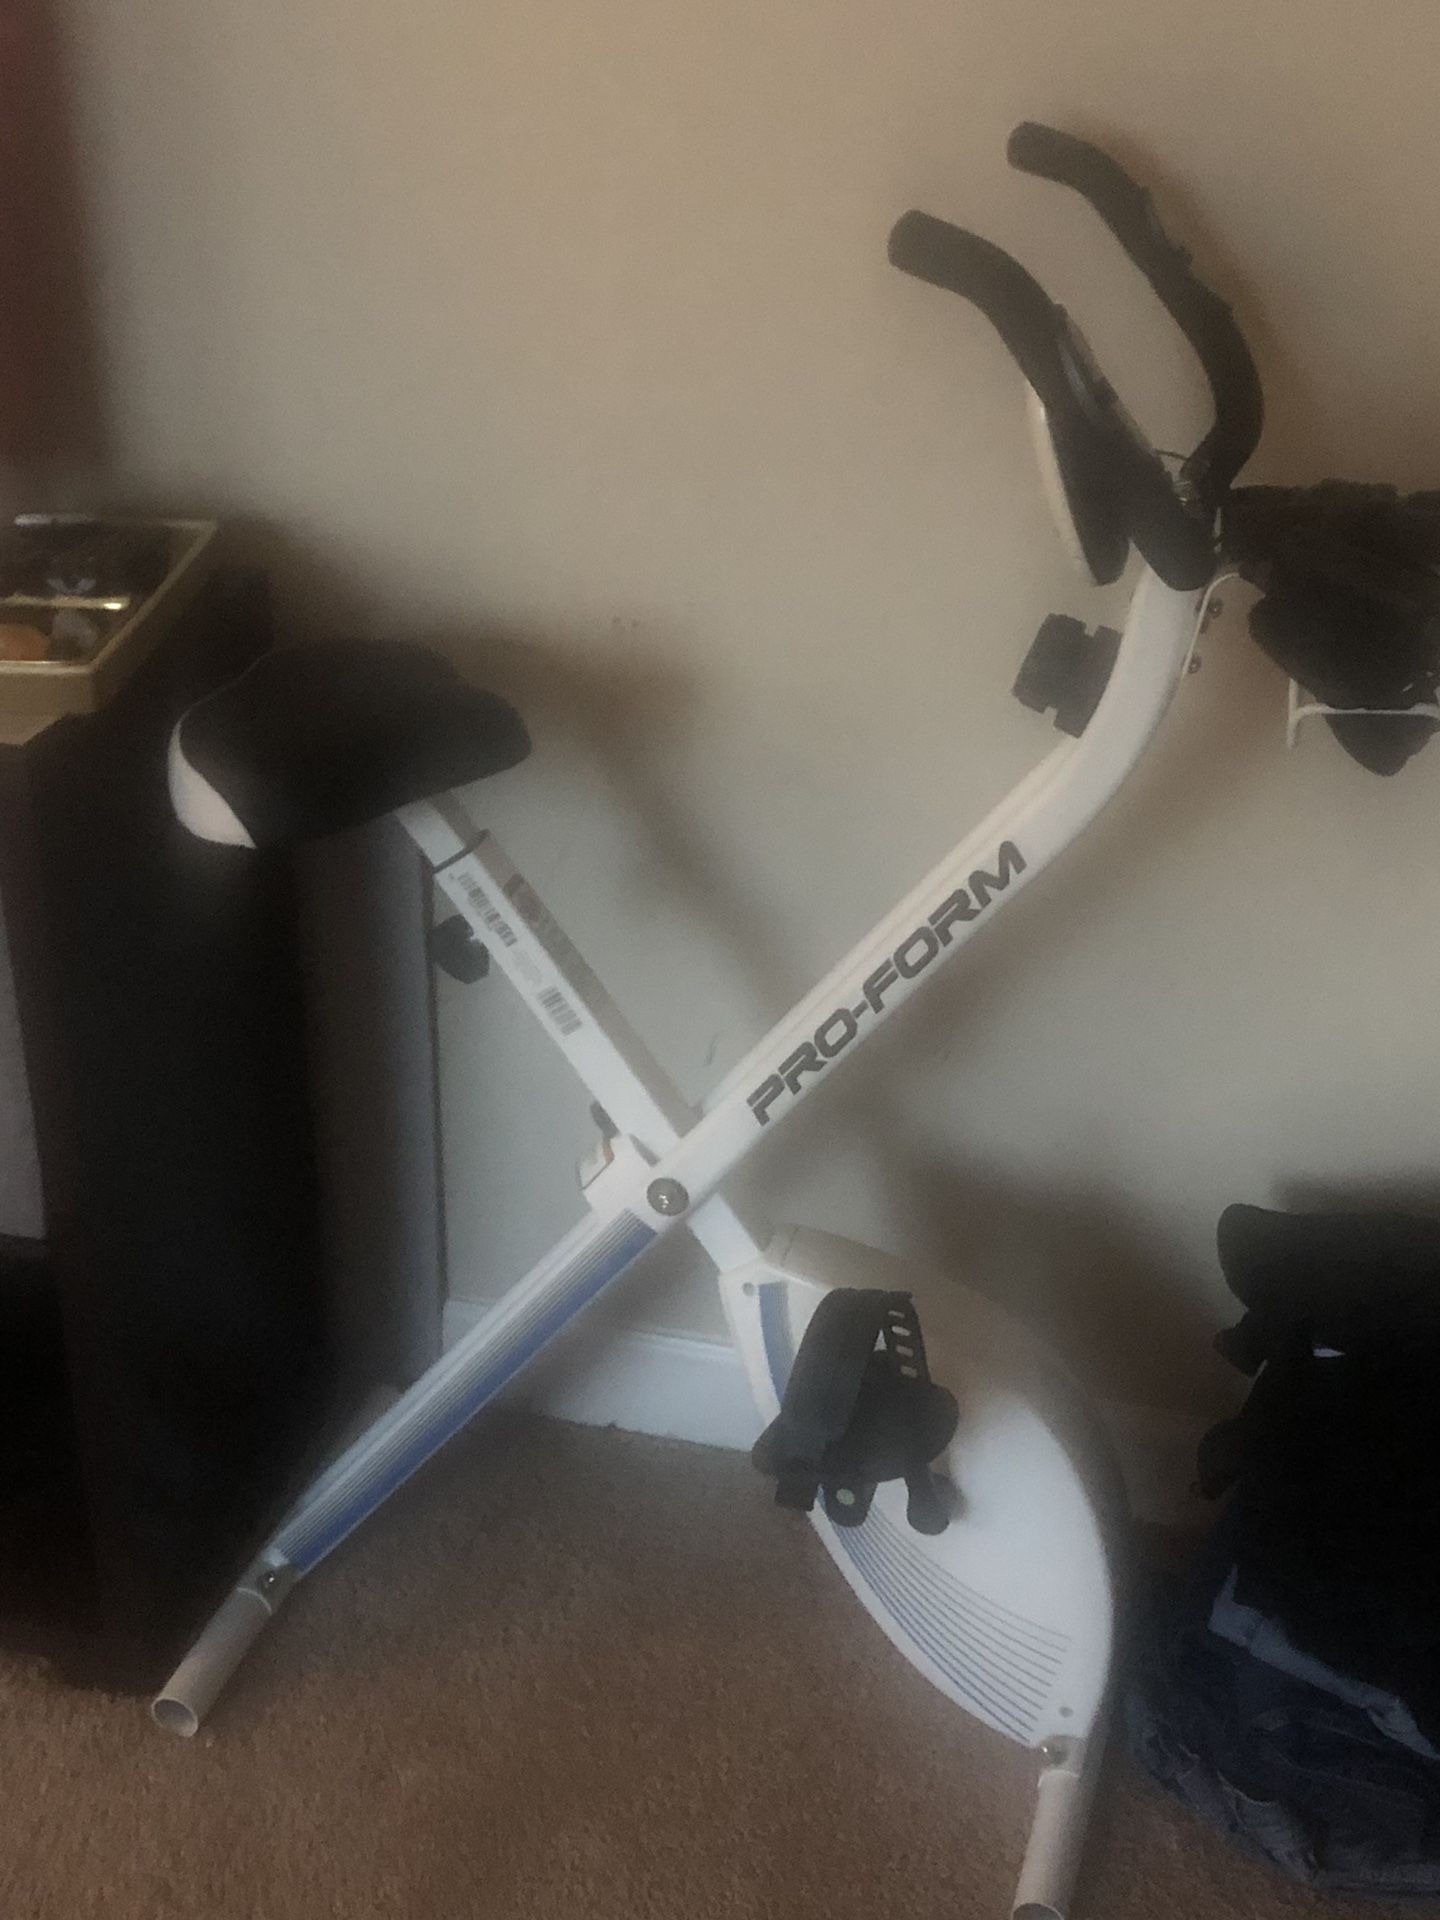 Free pro form bike ( pedal needed)